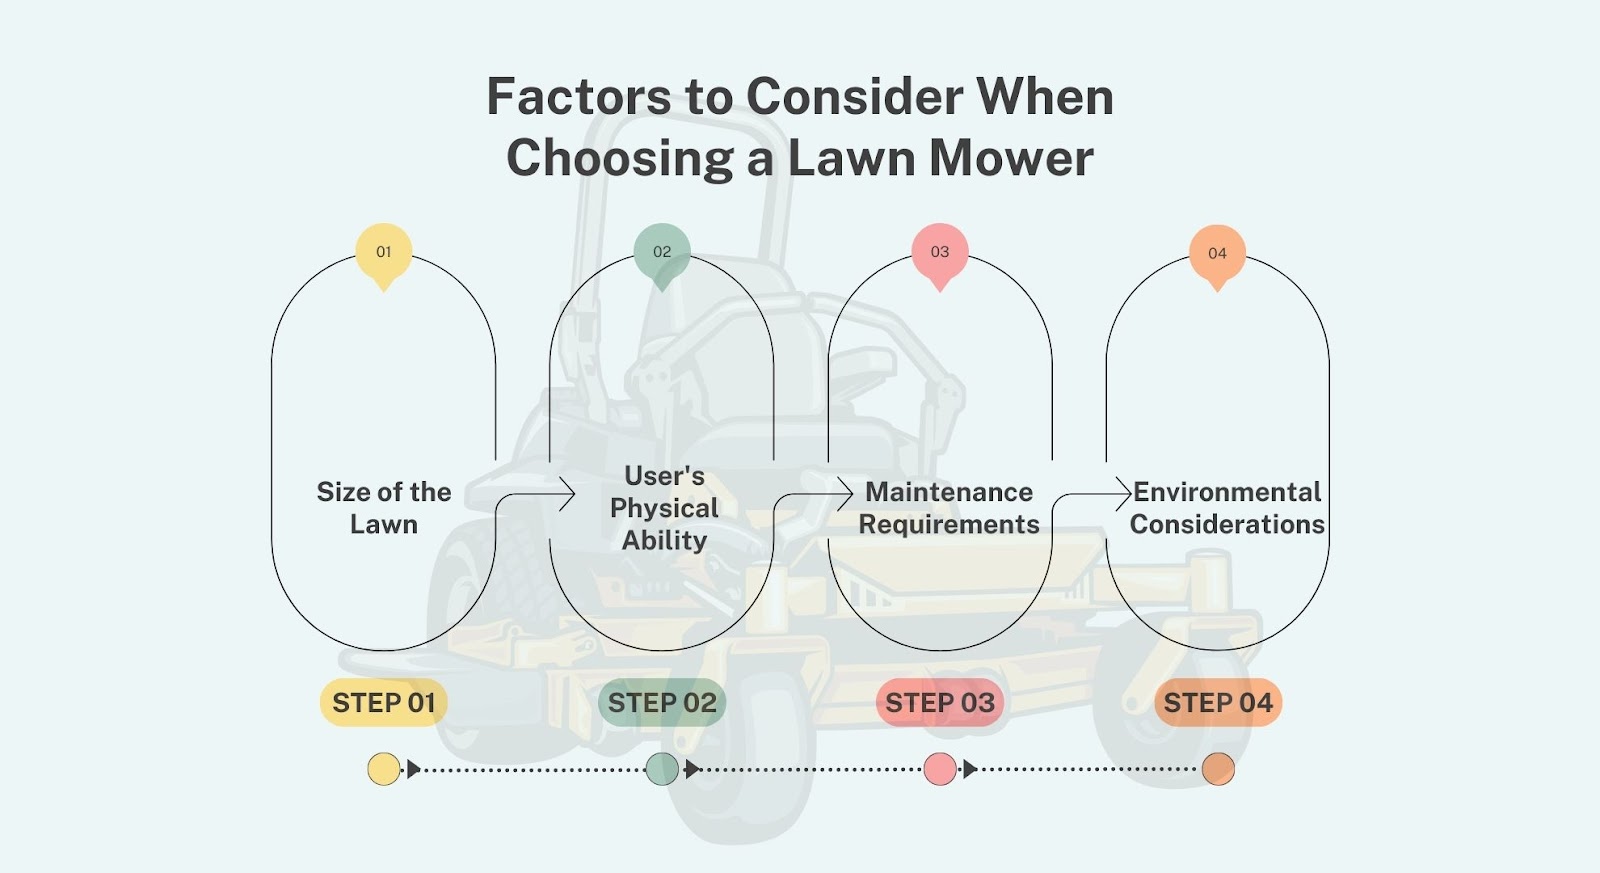 Factors to Consider When Choosing a Lawn Mower